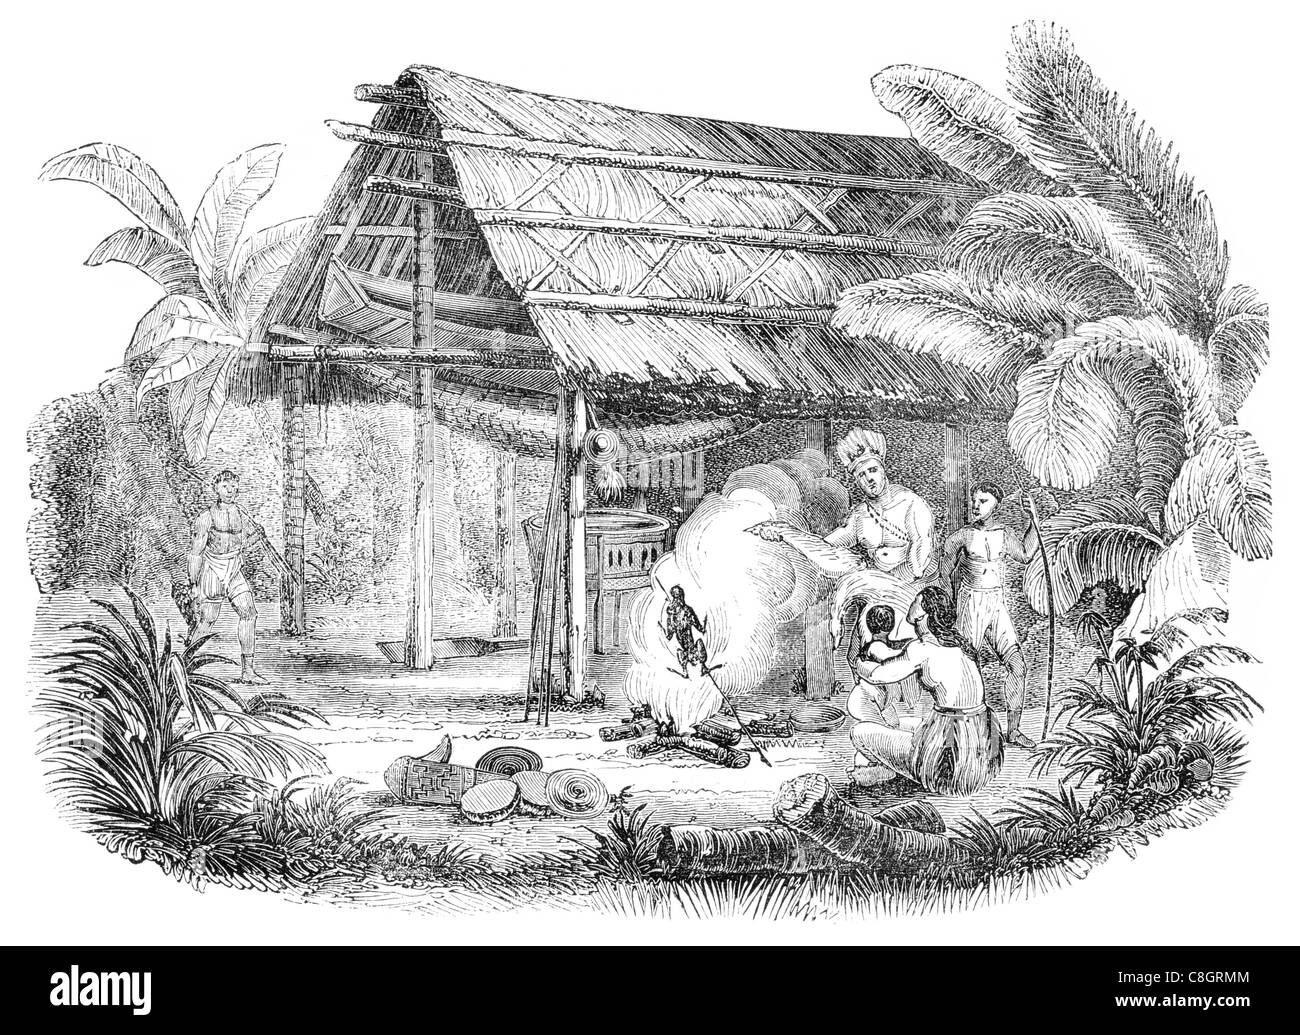 South American Indian hut huts crude shelter dwelling home house grass palm mud nomadic culture wilderness plantation jungle Stock Photo